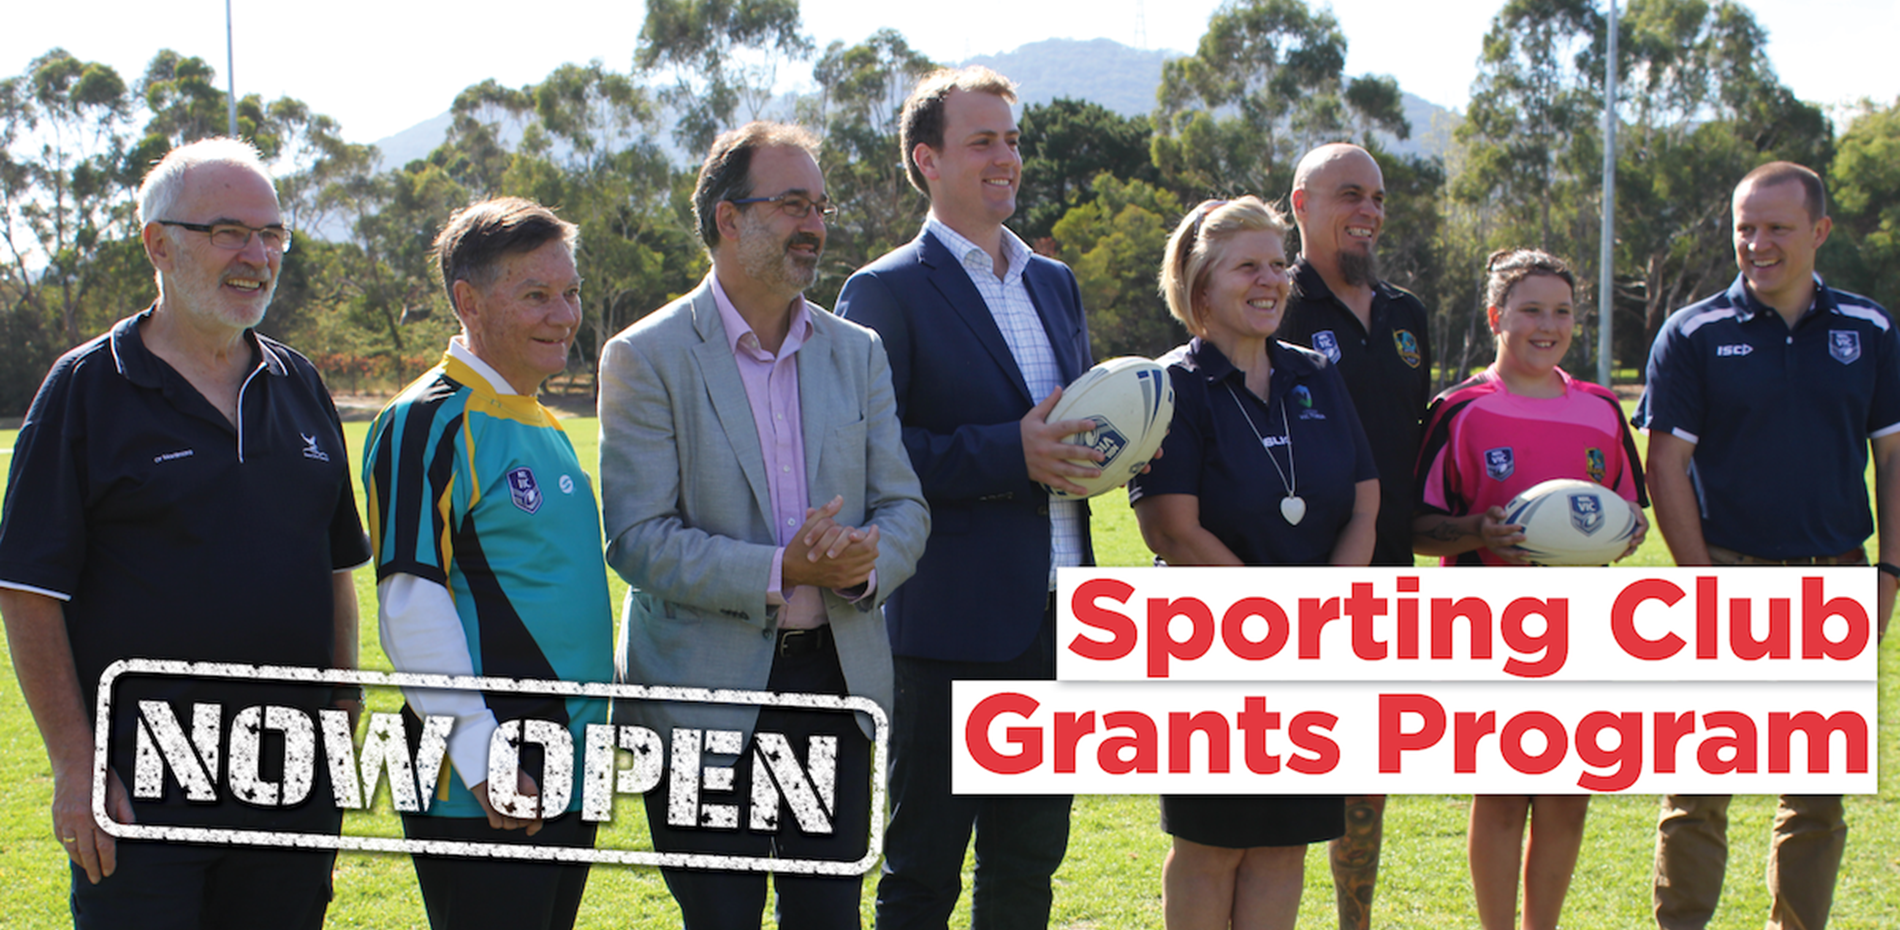 BAYSWATER CLUBS ENCOURAGED TO APPLY FOR SPORTING CLUB GRANTS Main Image